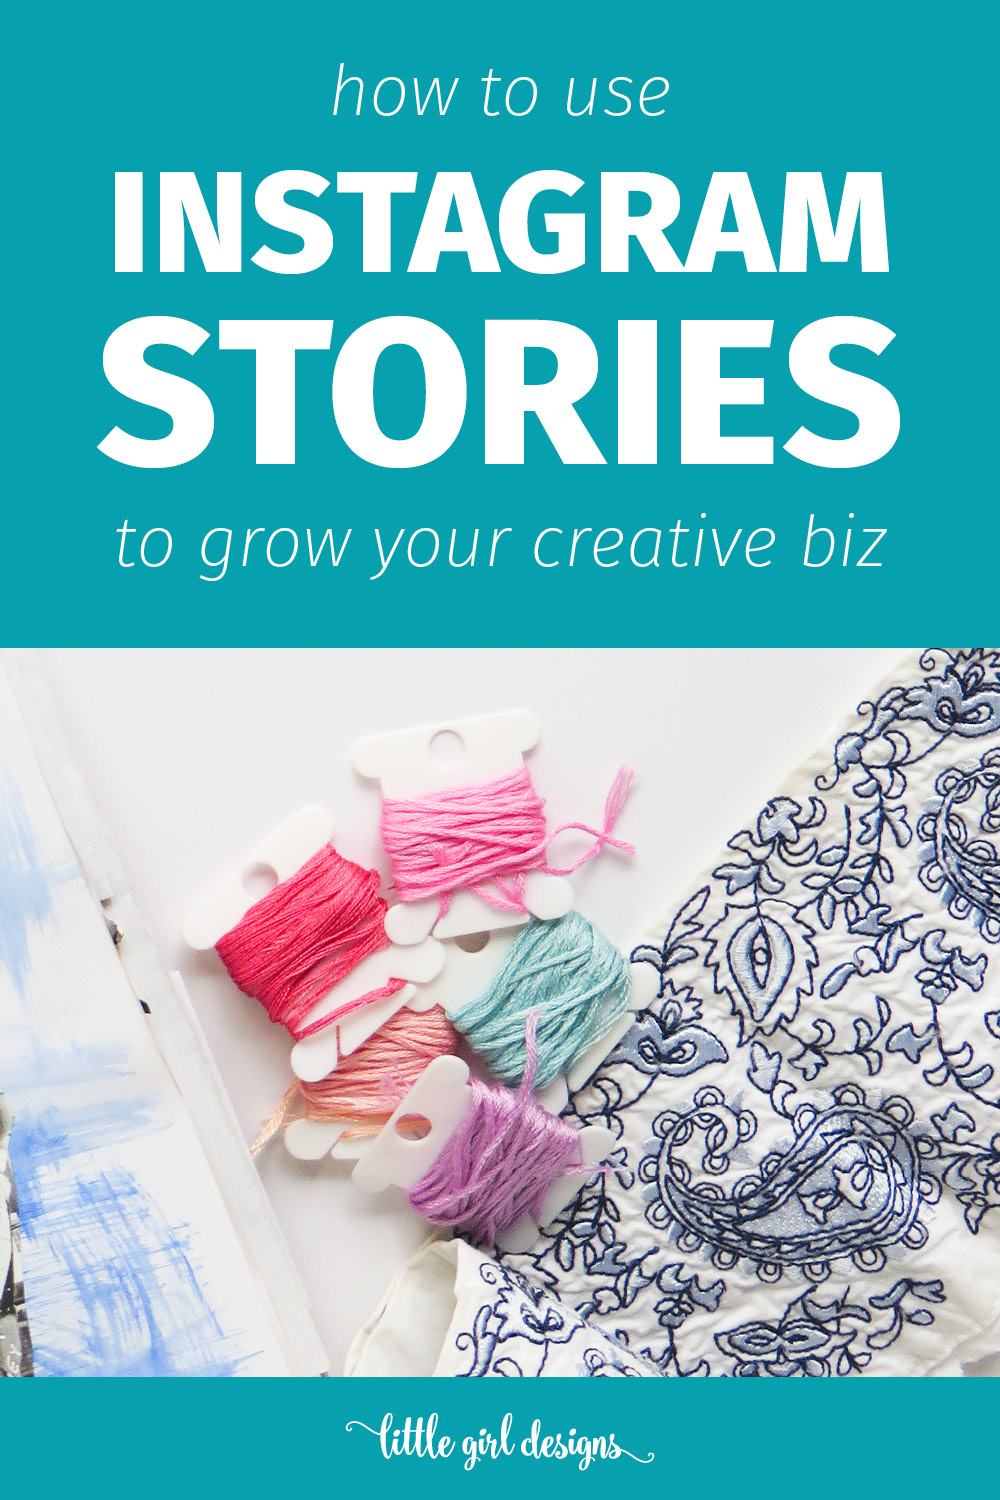 How to Use Instagram Stories To Grow Your Creative Biz